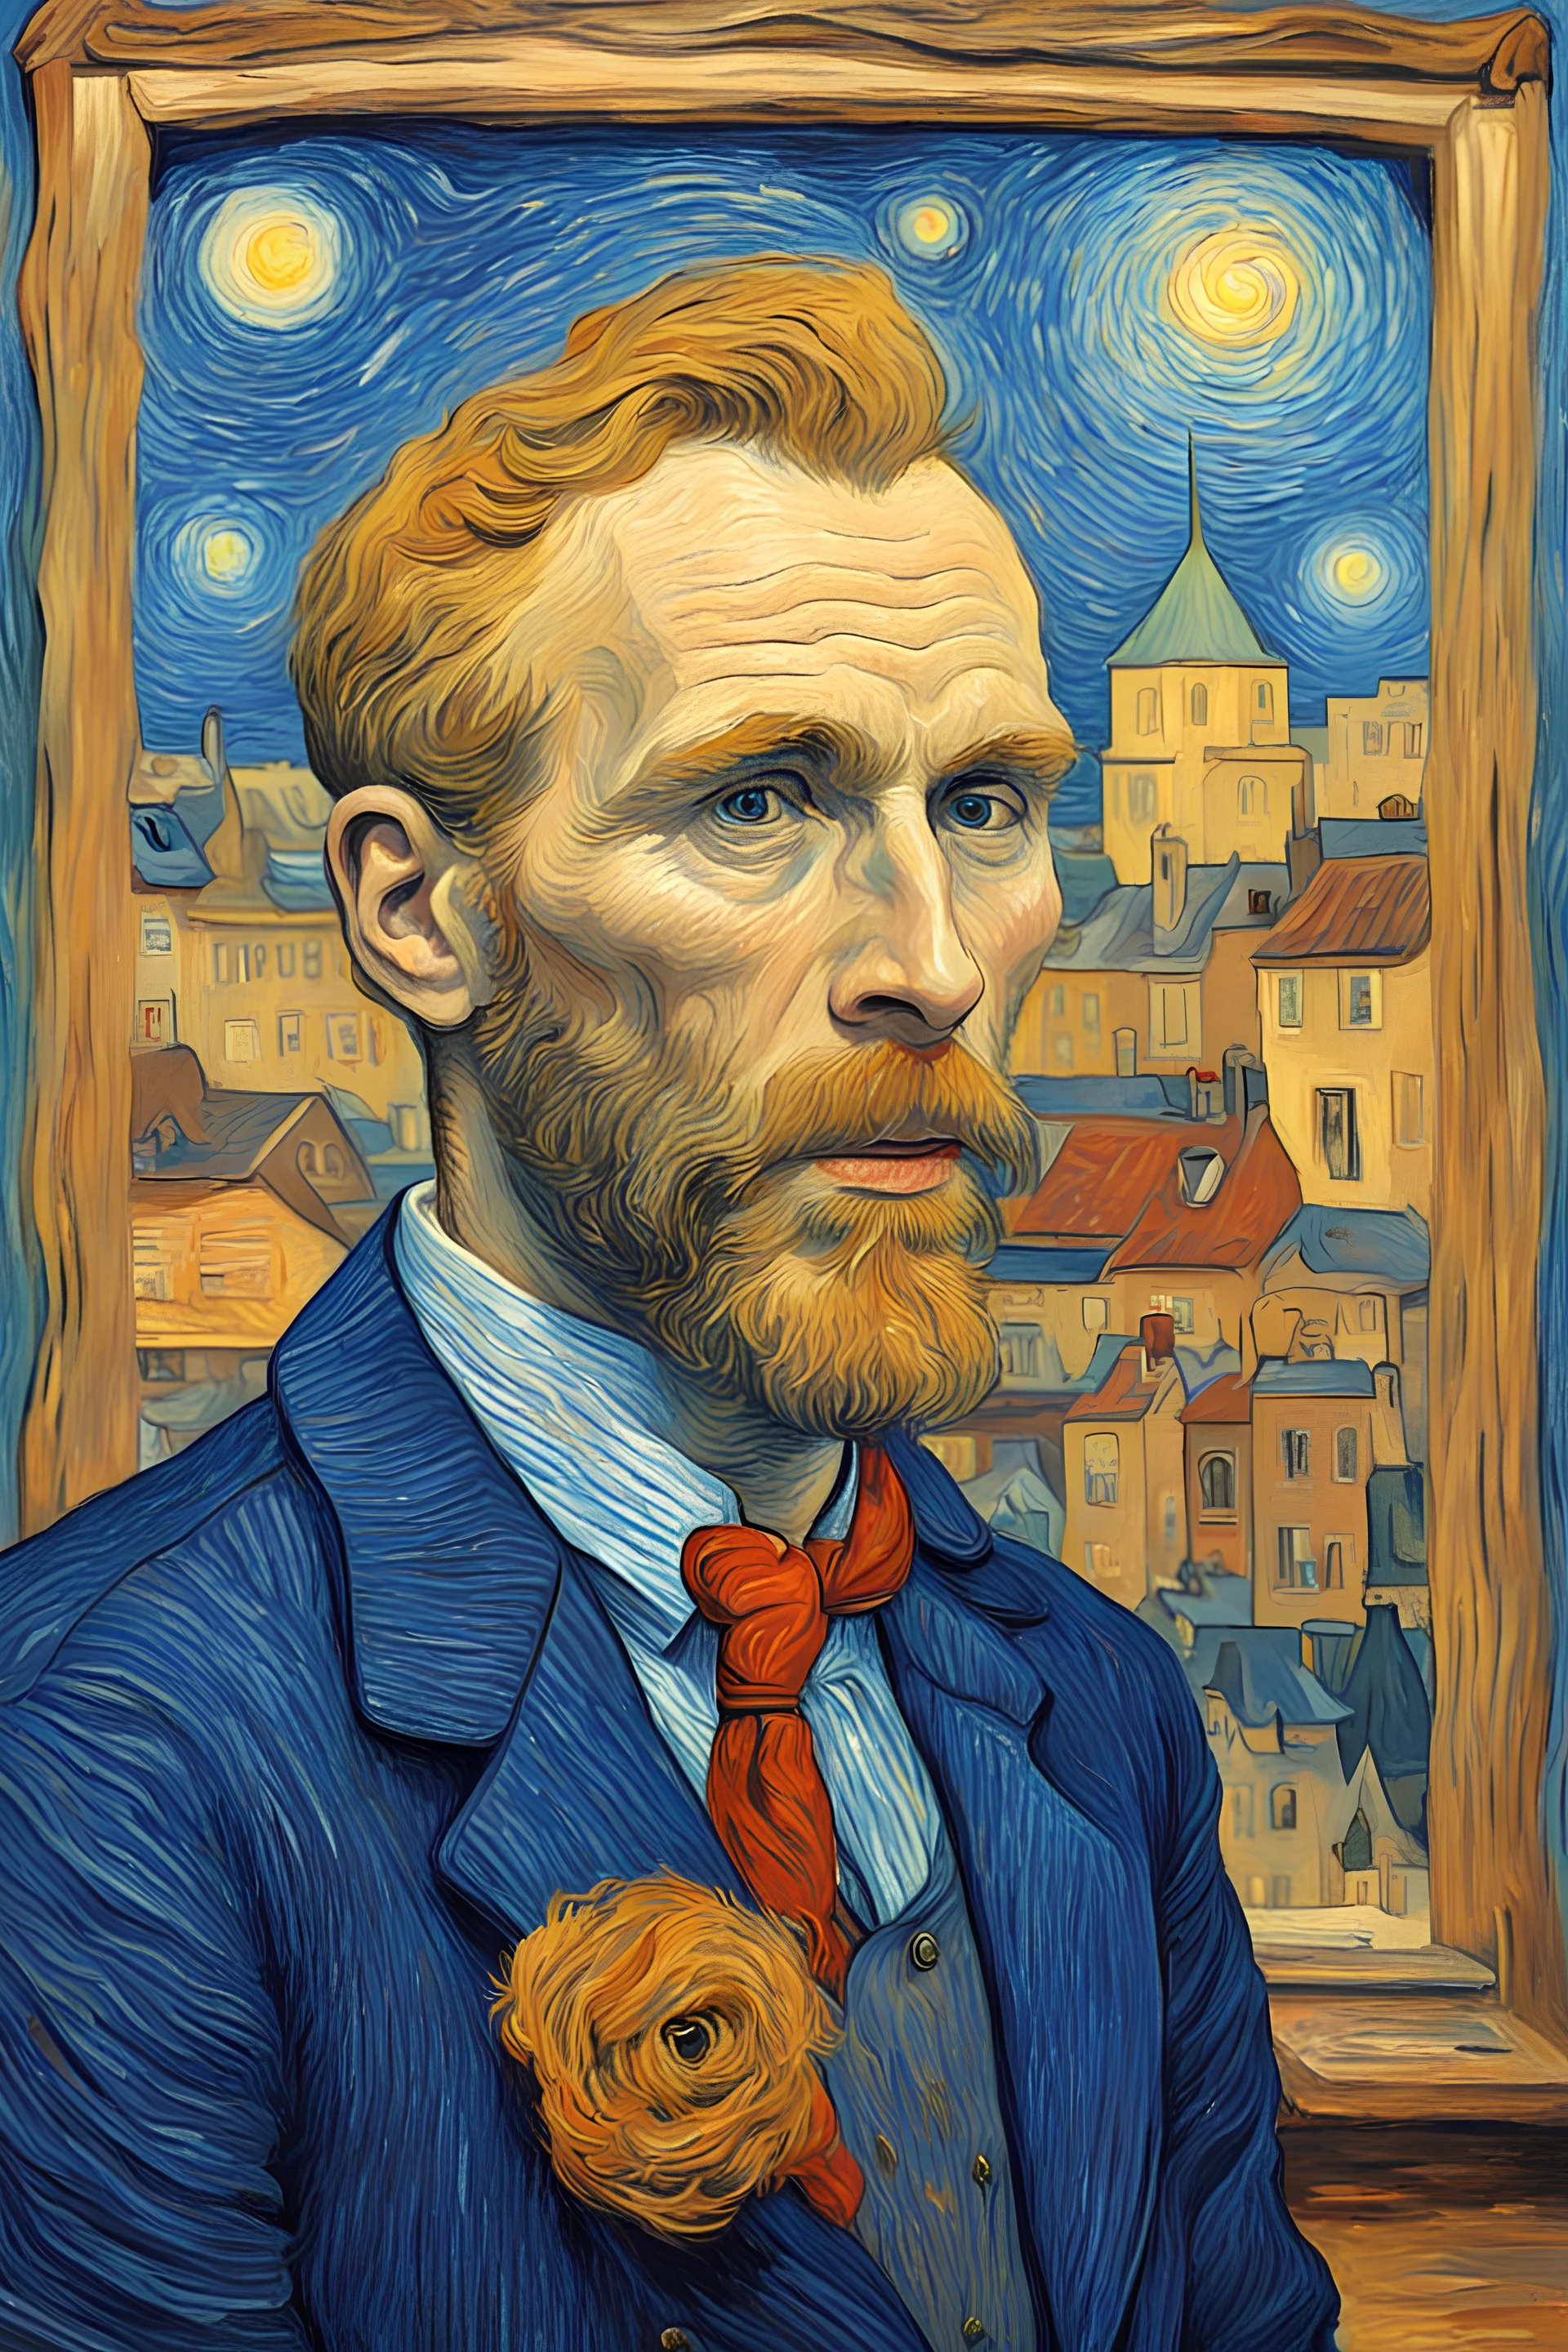 The dating square, Van Gogh style